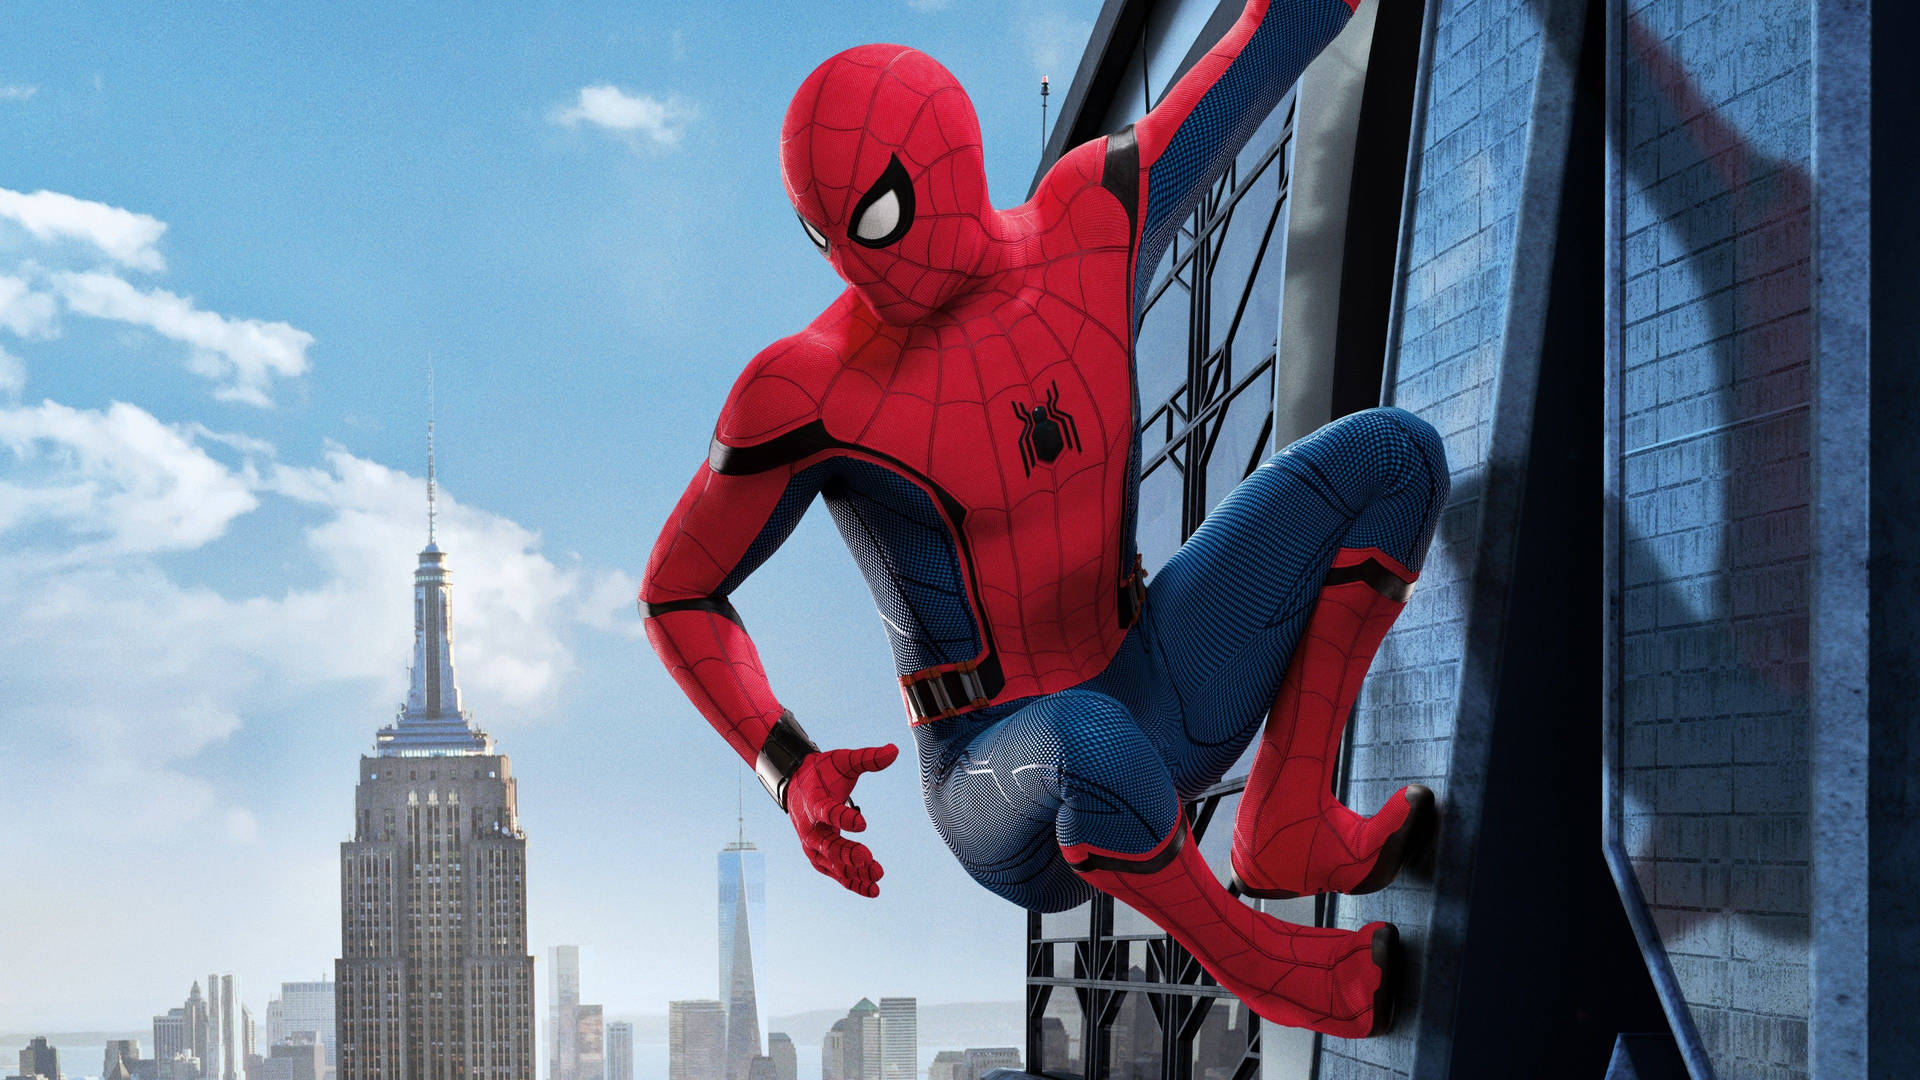 Spiderman On Building Background